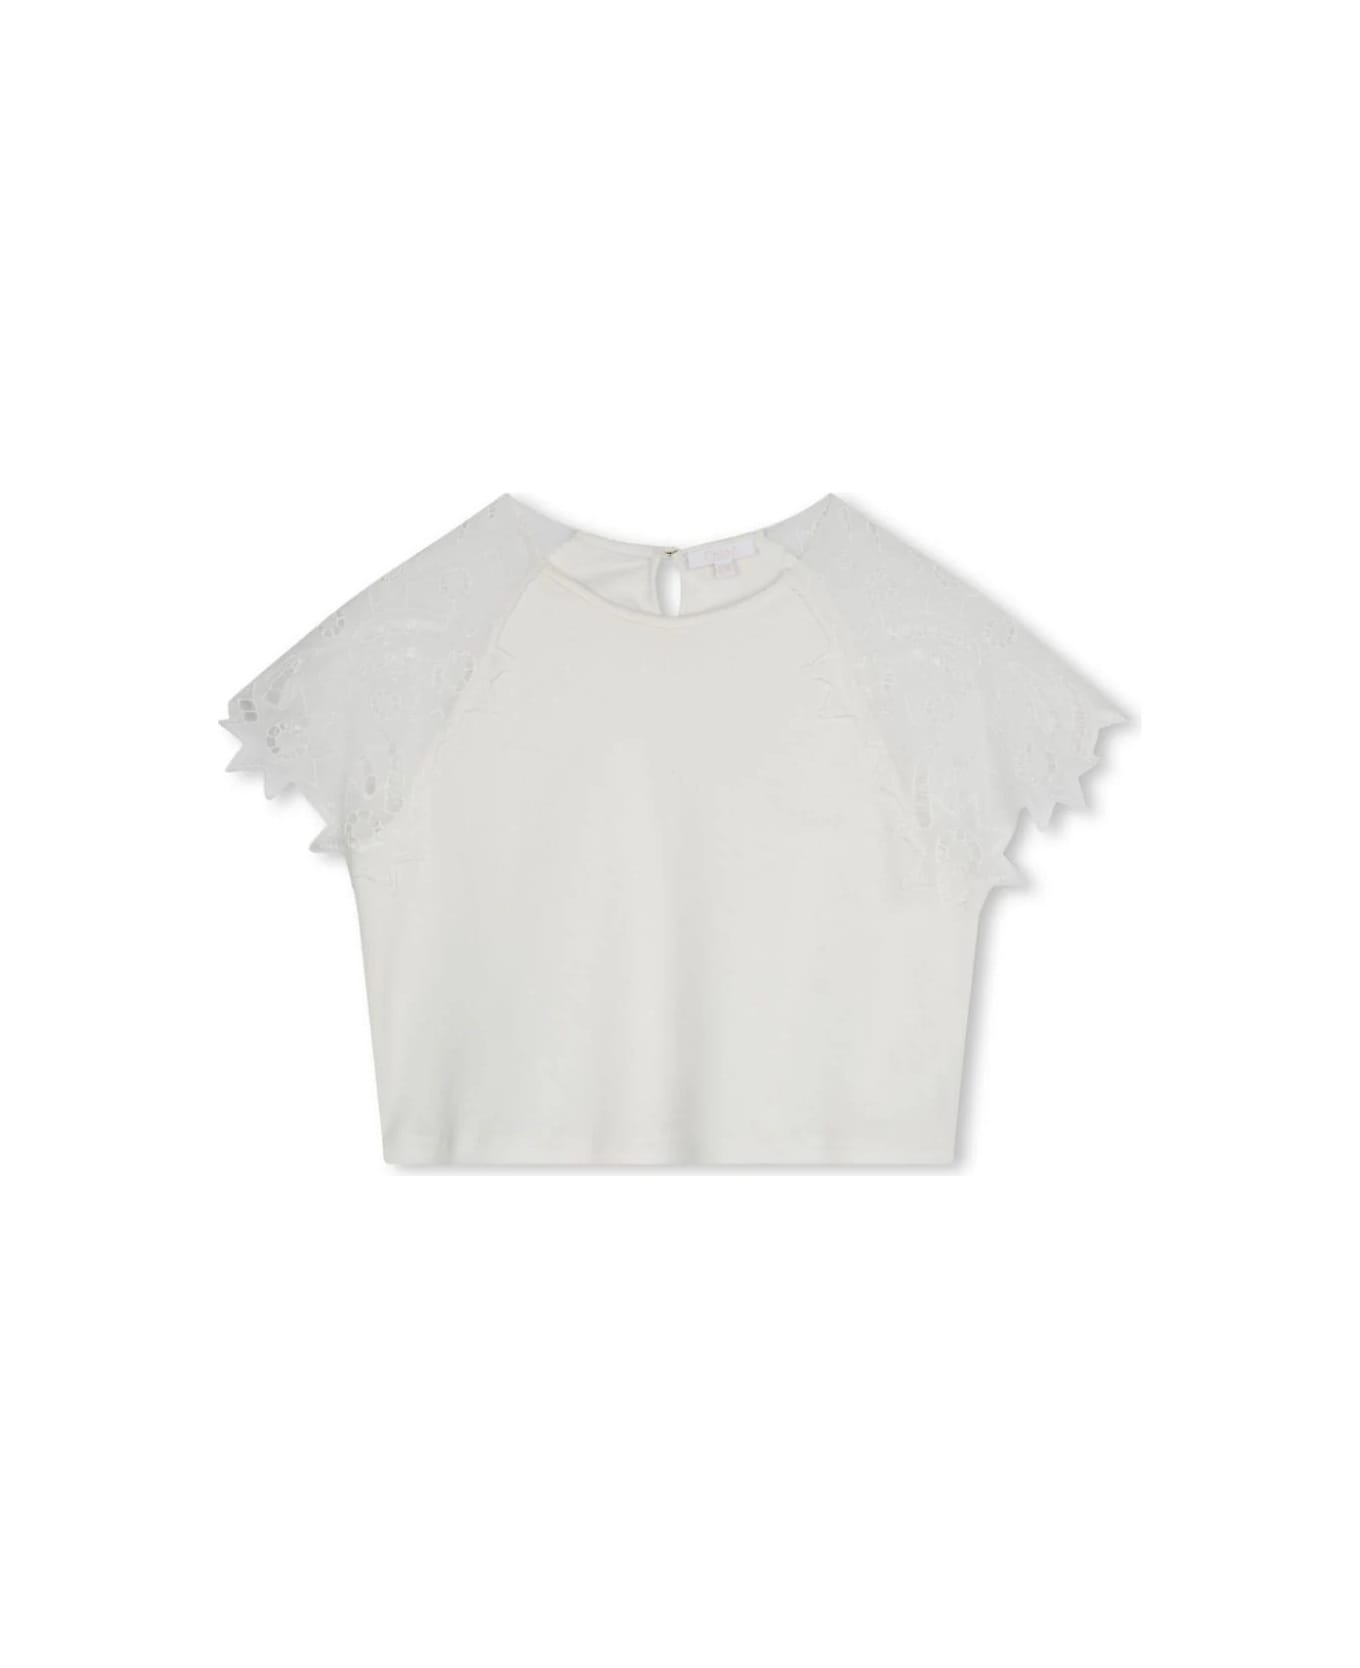 Chloé White Top With Guipure Lace - White